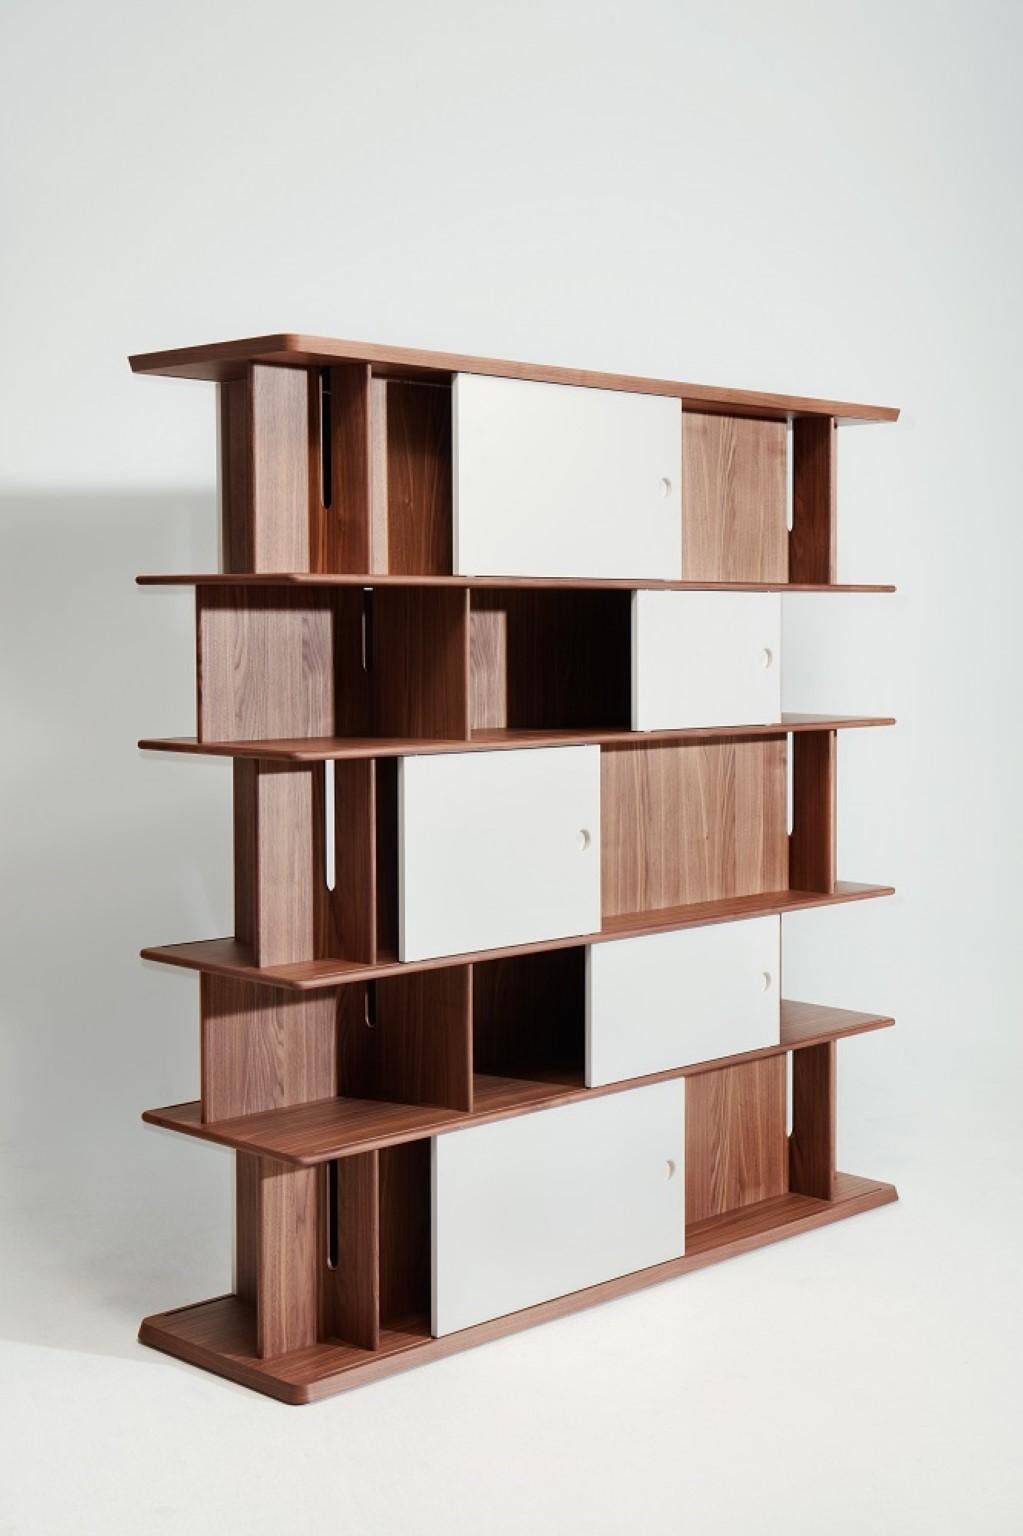 Large bookshelf by Neri & Hu
Dimensions: W 201 x D 55 x H 200 cm
Materials: Canaletto walnut veneer wood
Doors: Dark green, prune, warm white lacquered mdf

Founded in 2004 by partners Lyndon Neri and Rossana Hu, Neri&Hu Design and Research